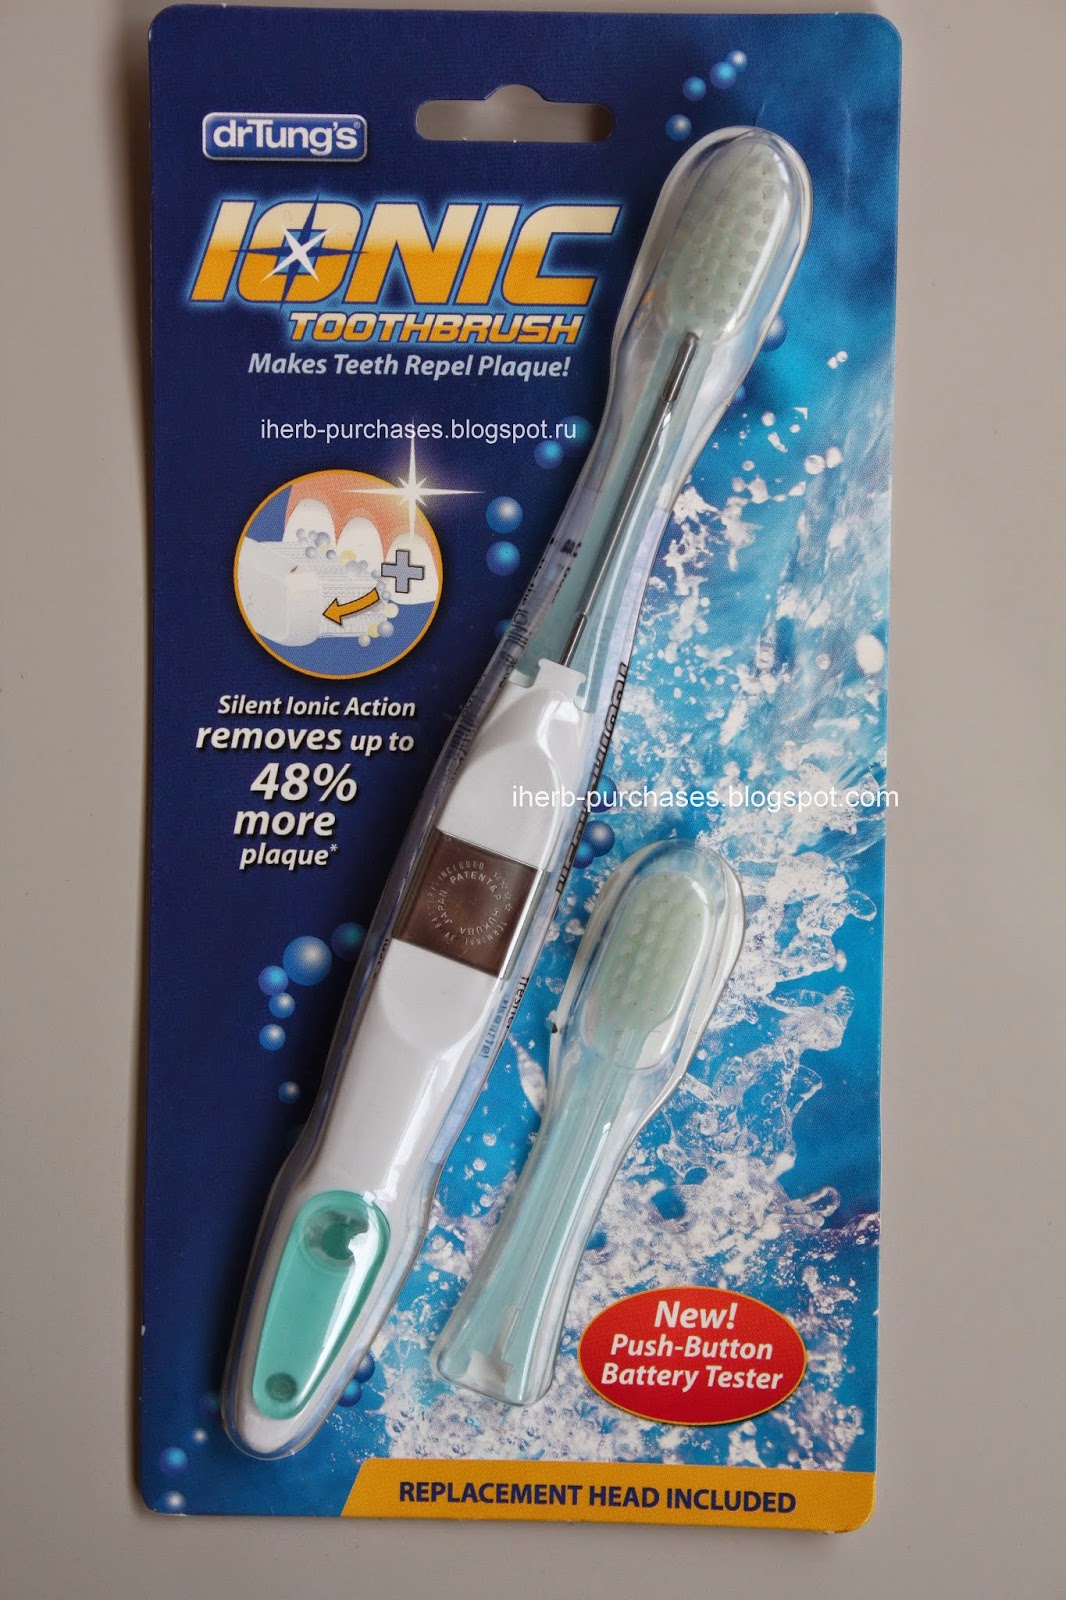 Dr. Tung's, Ionic Toothbrush, w/Replacement Head, 1 Toothbrush, 1 Replaceable Head